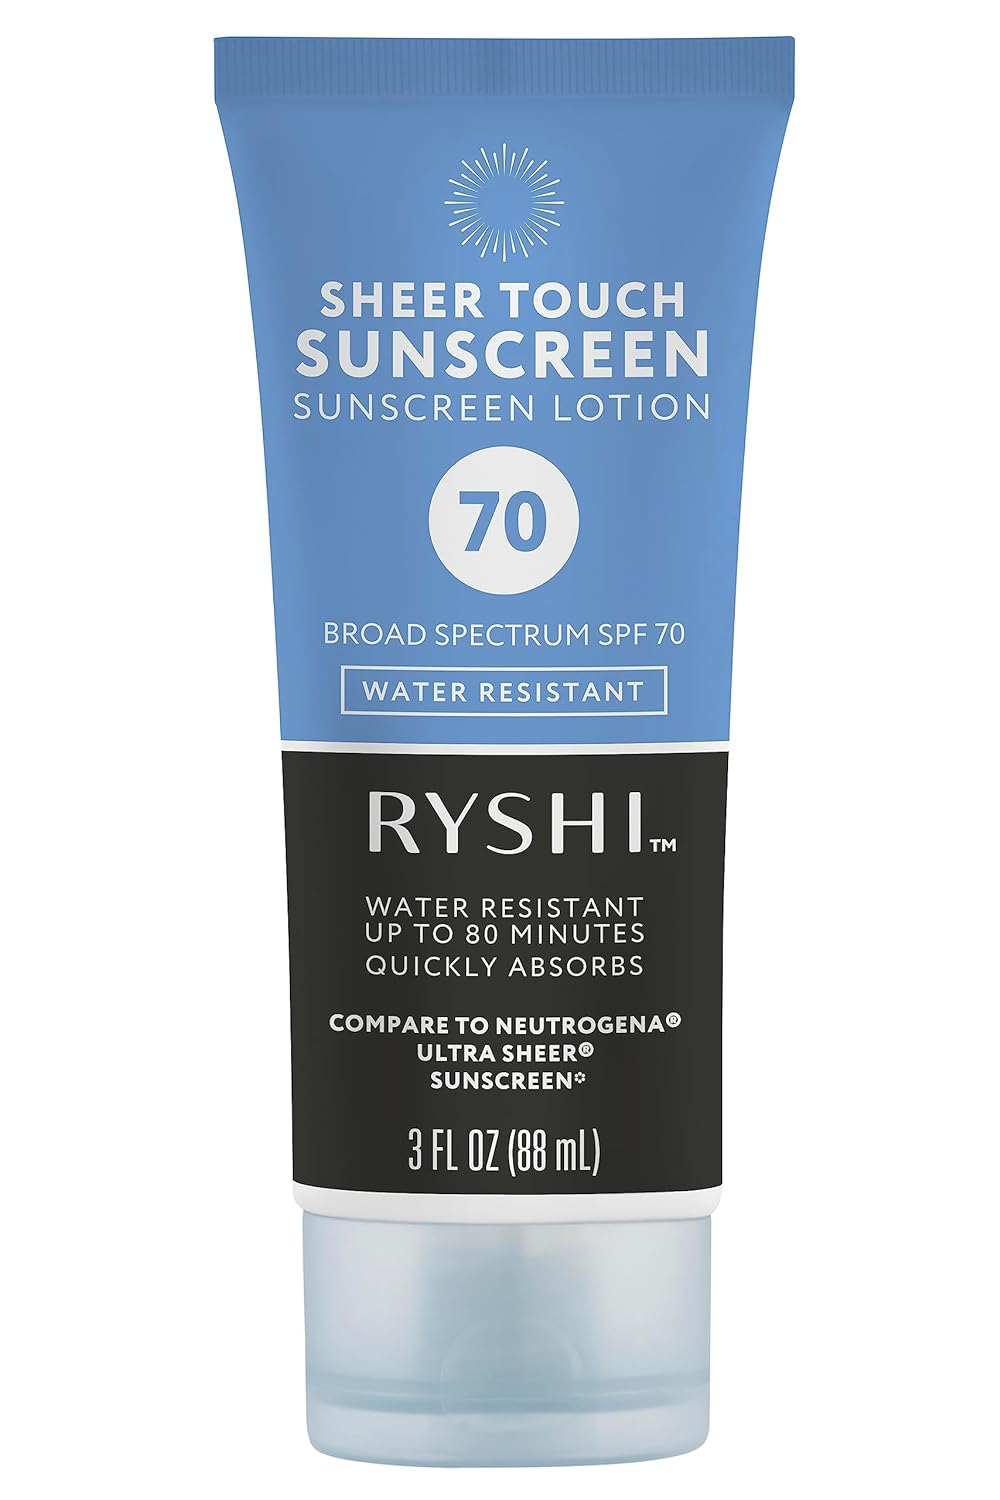 RYSHI Sheer Touch SPF 70 Sunscreen Lotion, 3 fl oz | Broad Spectrum, Water Resistant and Non-Greasy Face & Body Sunblock (Rite Aid Brand)